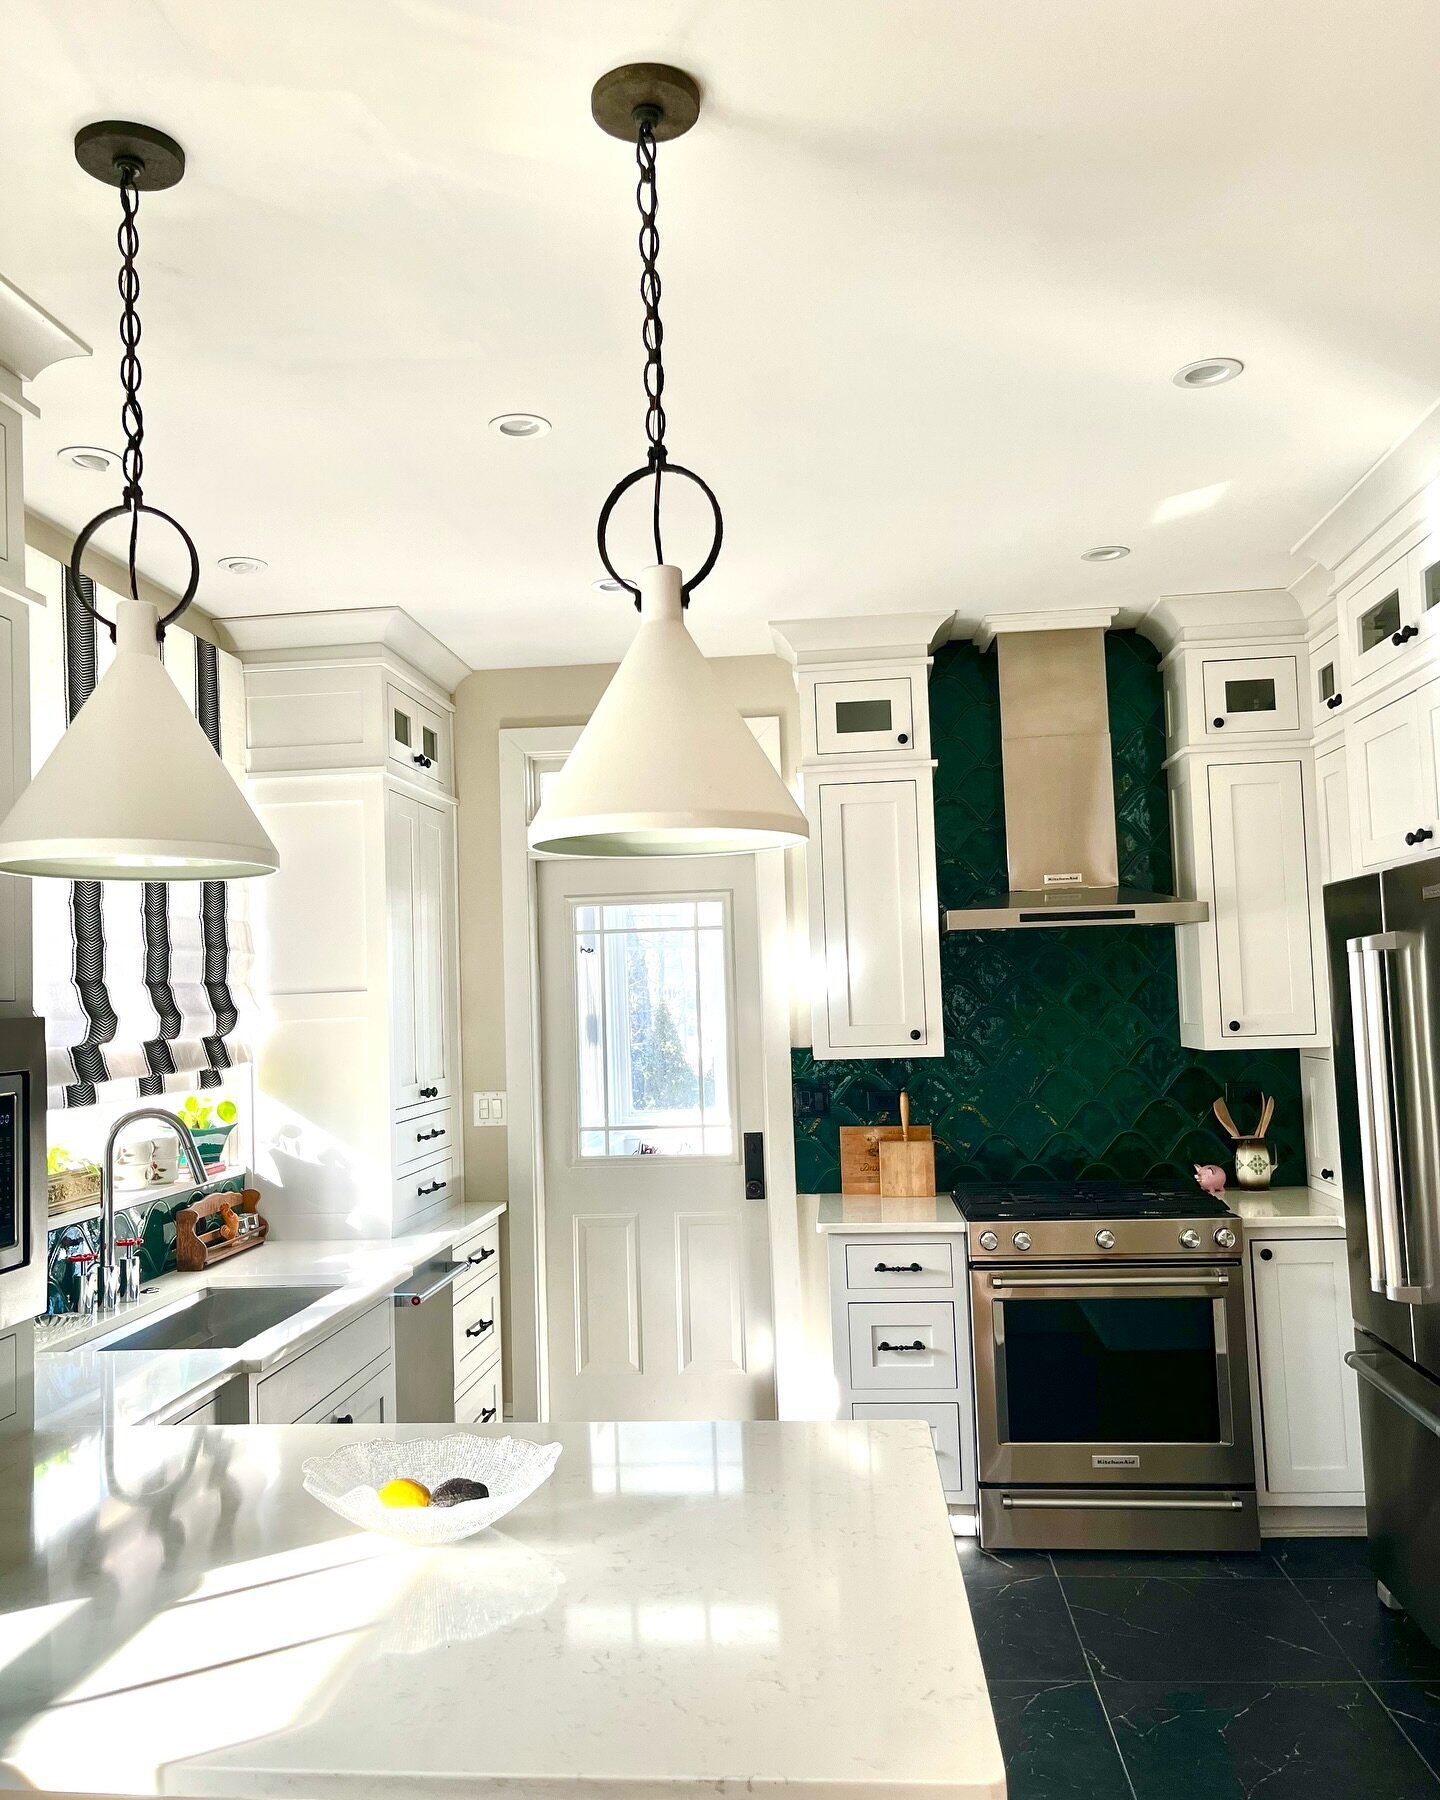 Caught a glimpse of some sunshine after 9 consecutive days of clouds and rain. 

I was even able to beach for 10 minutes in my kitchen!
🧘&zwj;♂️☀️⛱️

@thetileshop @visualcomfort @theshadestore helped make this my dream kitchen in my tiny bungalow.